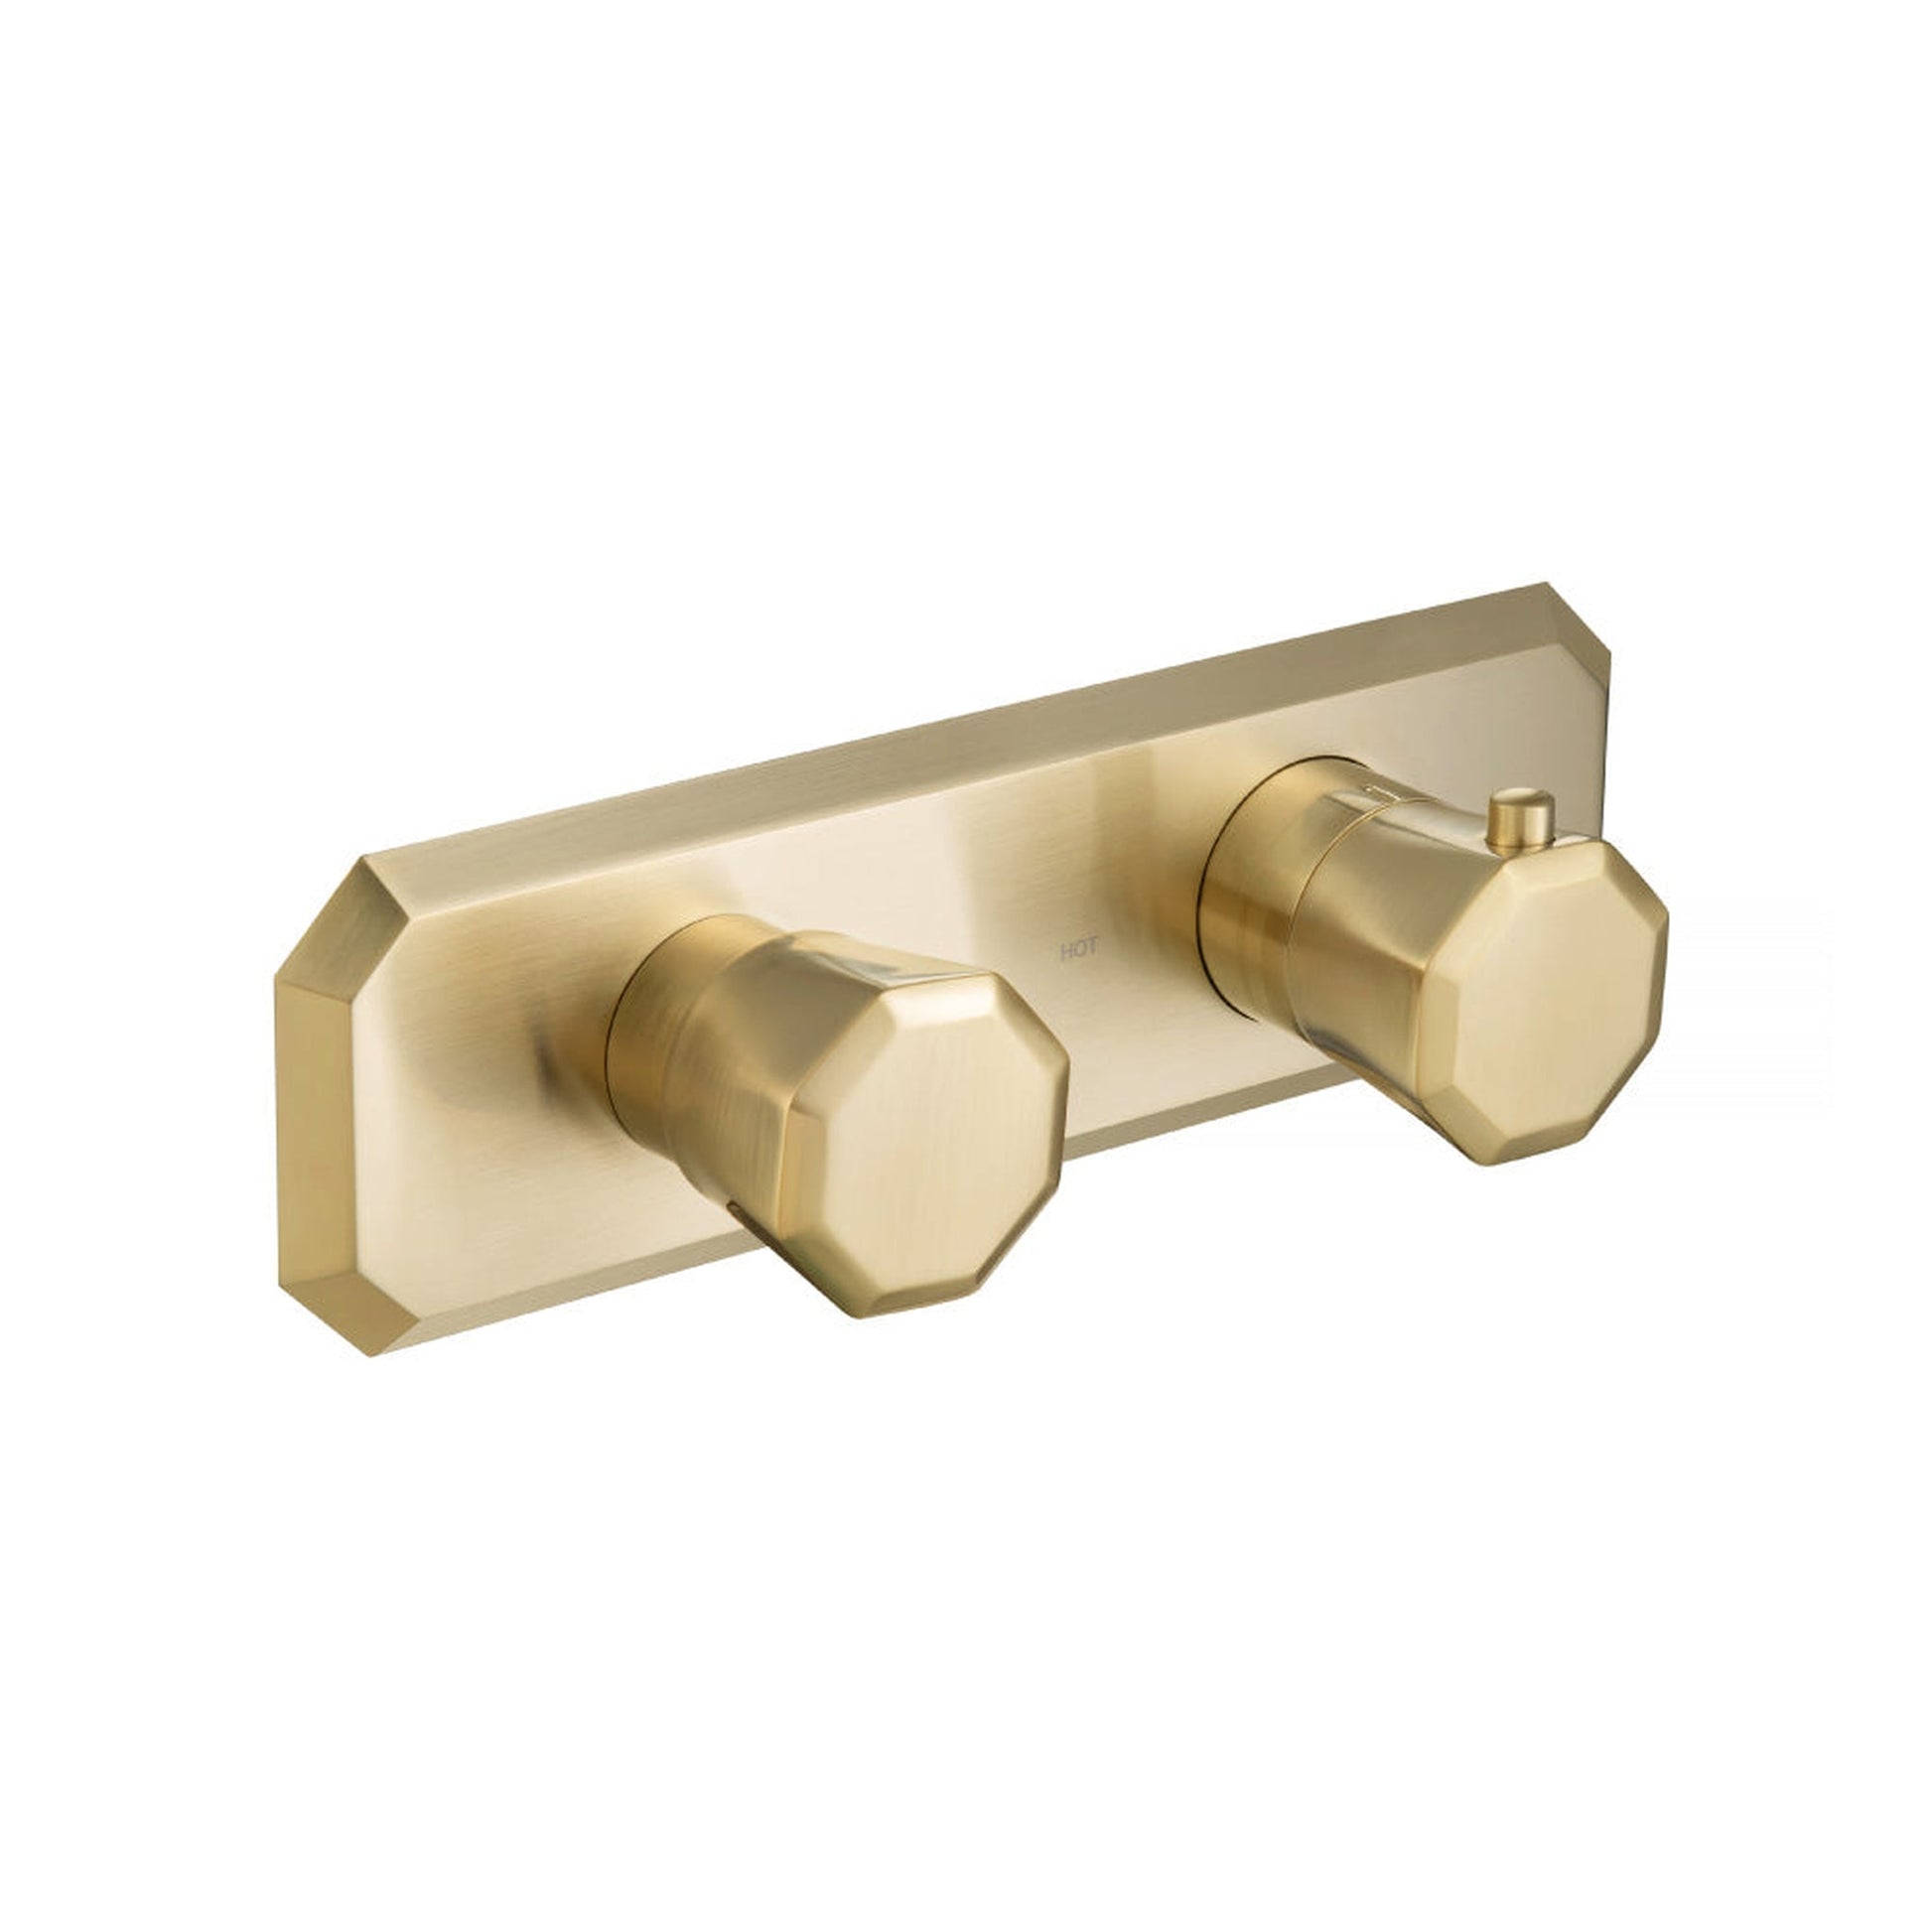 Isenberg Serie 230 3/4" Single Output Horizontal Thermostatic Shower Valve and Trim in Satin Brass (230.2693SB)